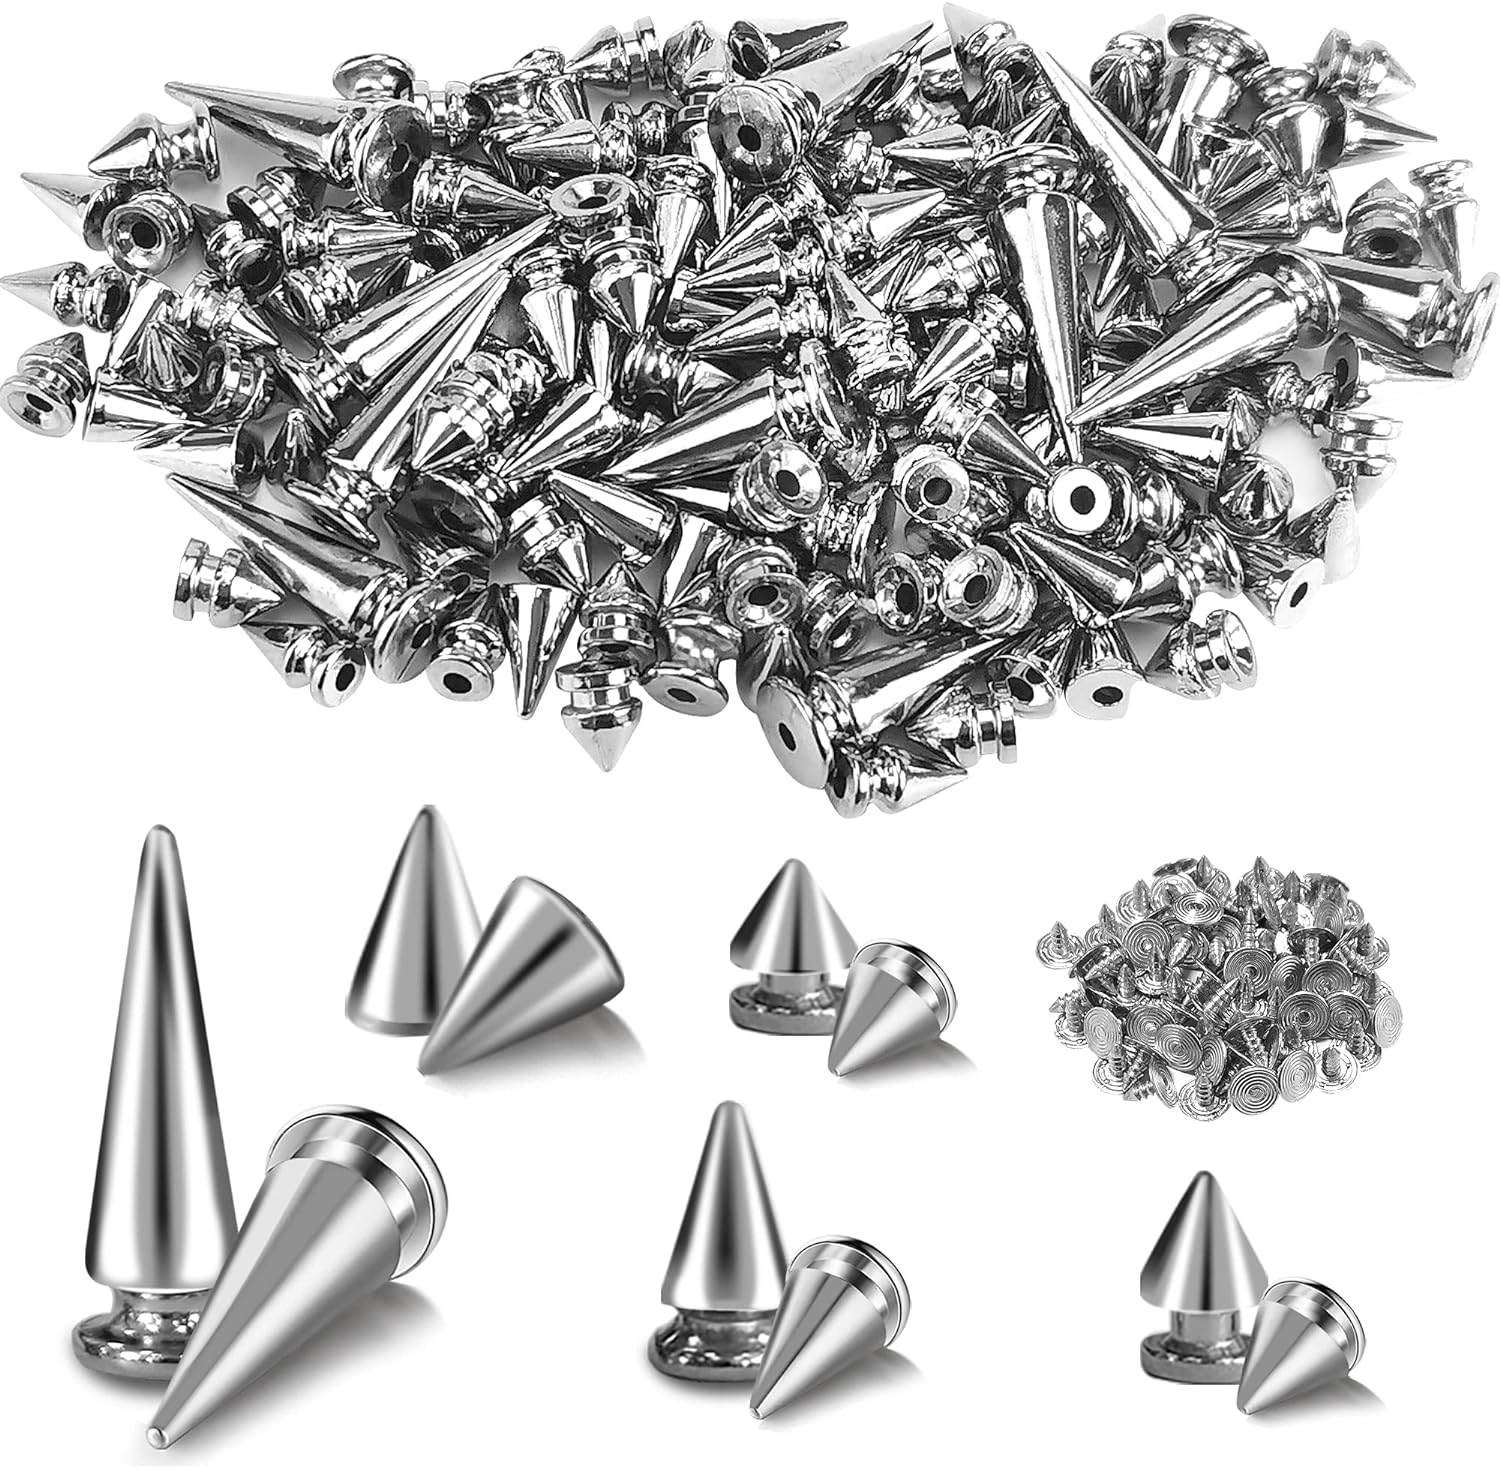 Punk Spikes And Studs, 60 Pcs Metal Punk Studs, Bullet Cone Spikes For  Clothing Shoes Leather Belts Bag Accessories Diy, 2 Size